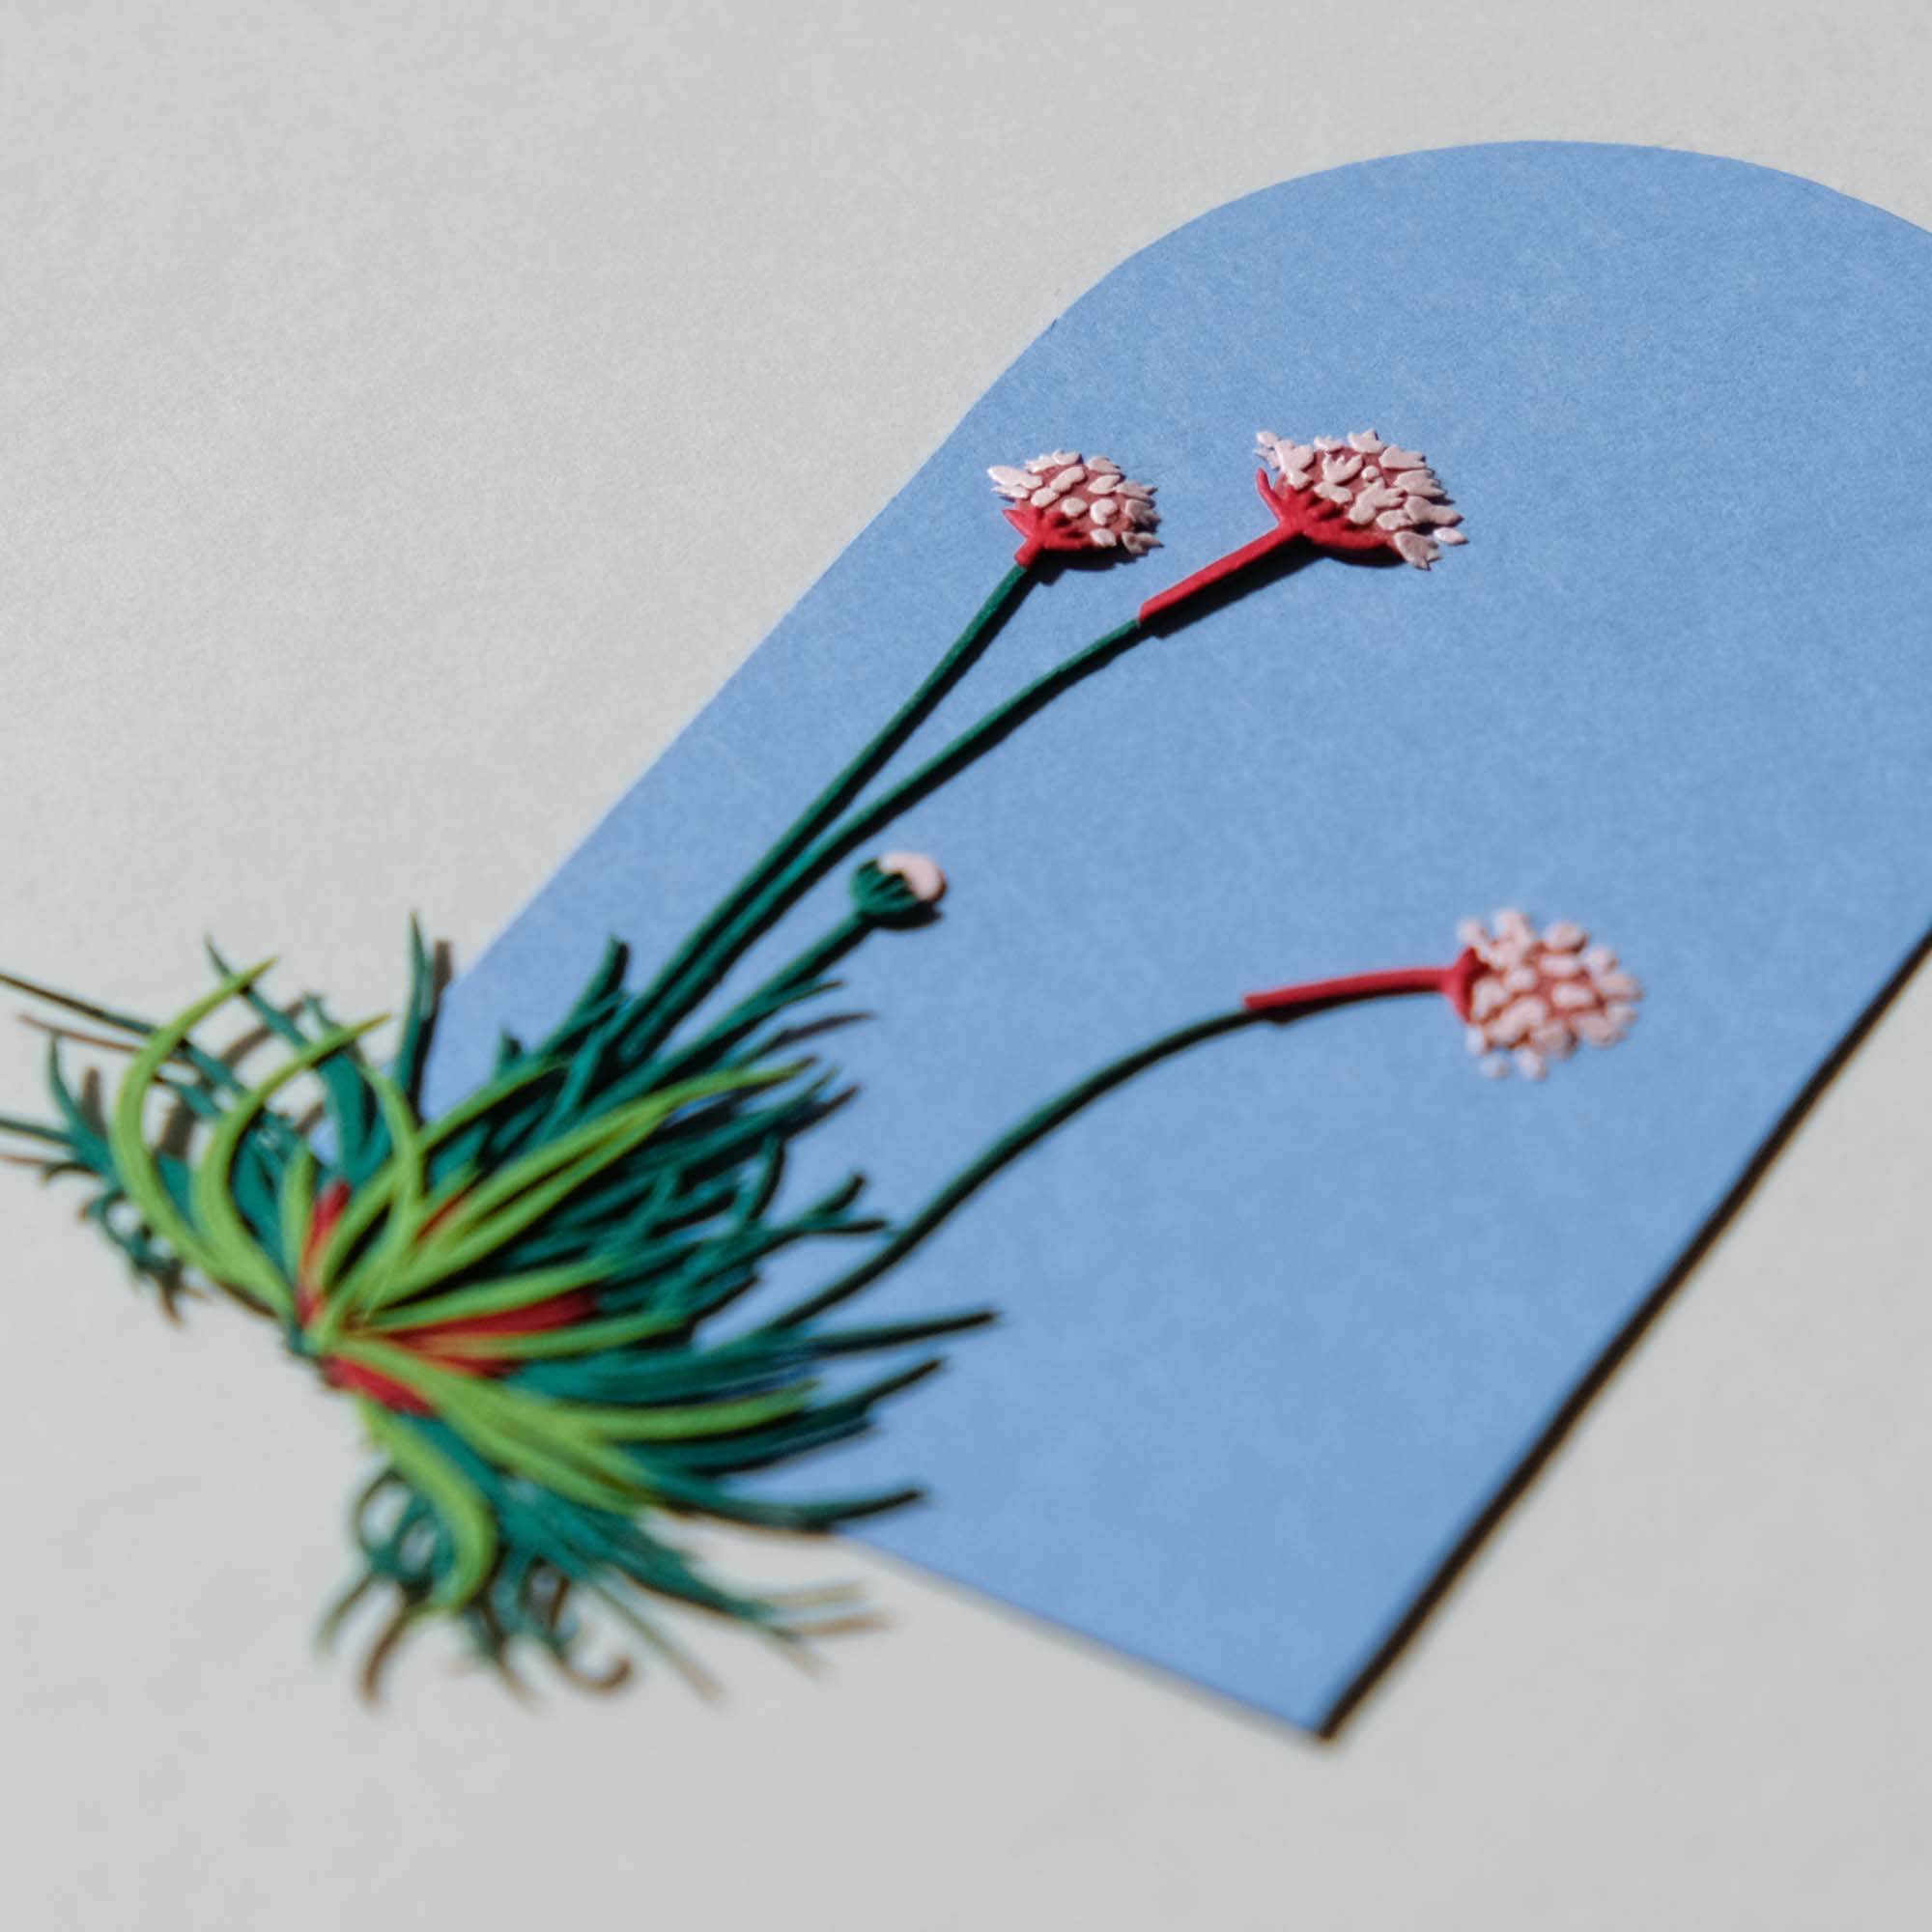 A close-up of the sea thrift flowers shows the layers of paper that form the tiny petals and the thin leaves.